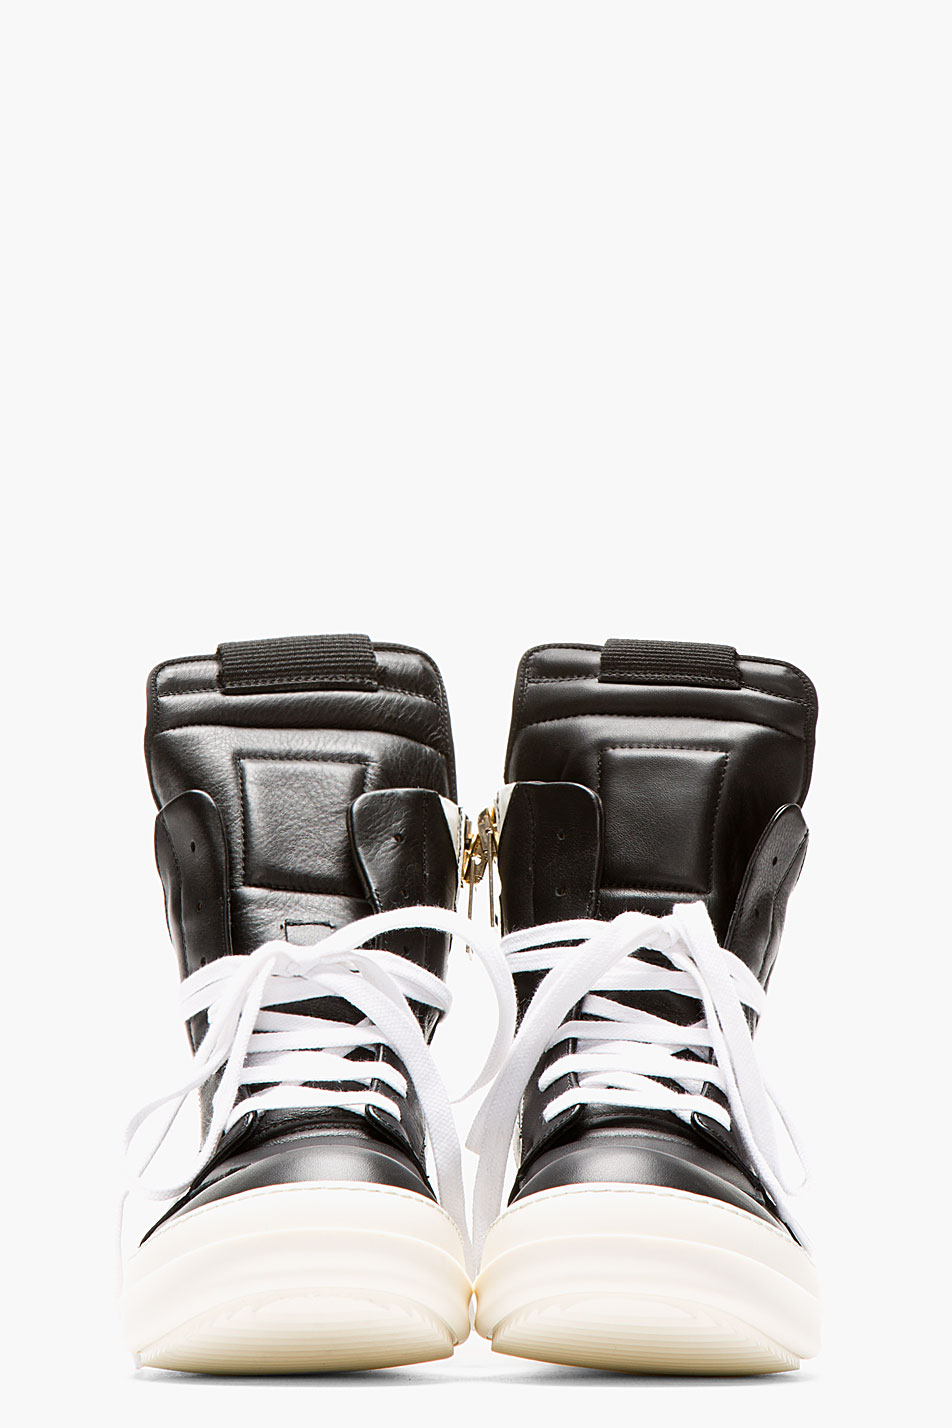 High End Fashion Sneakers rick owens 2